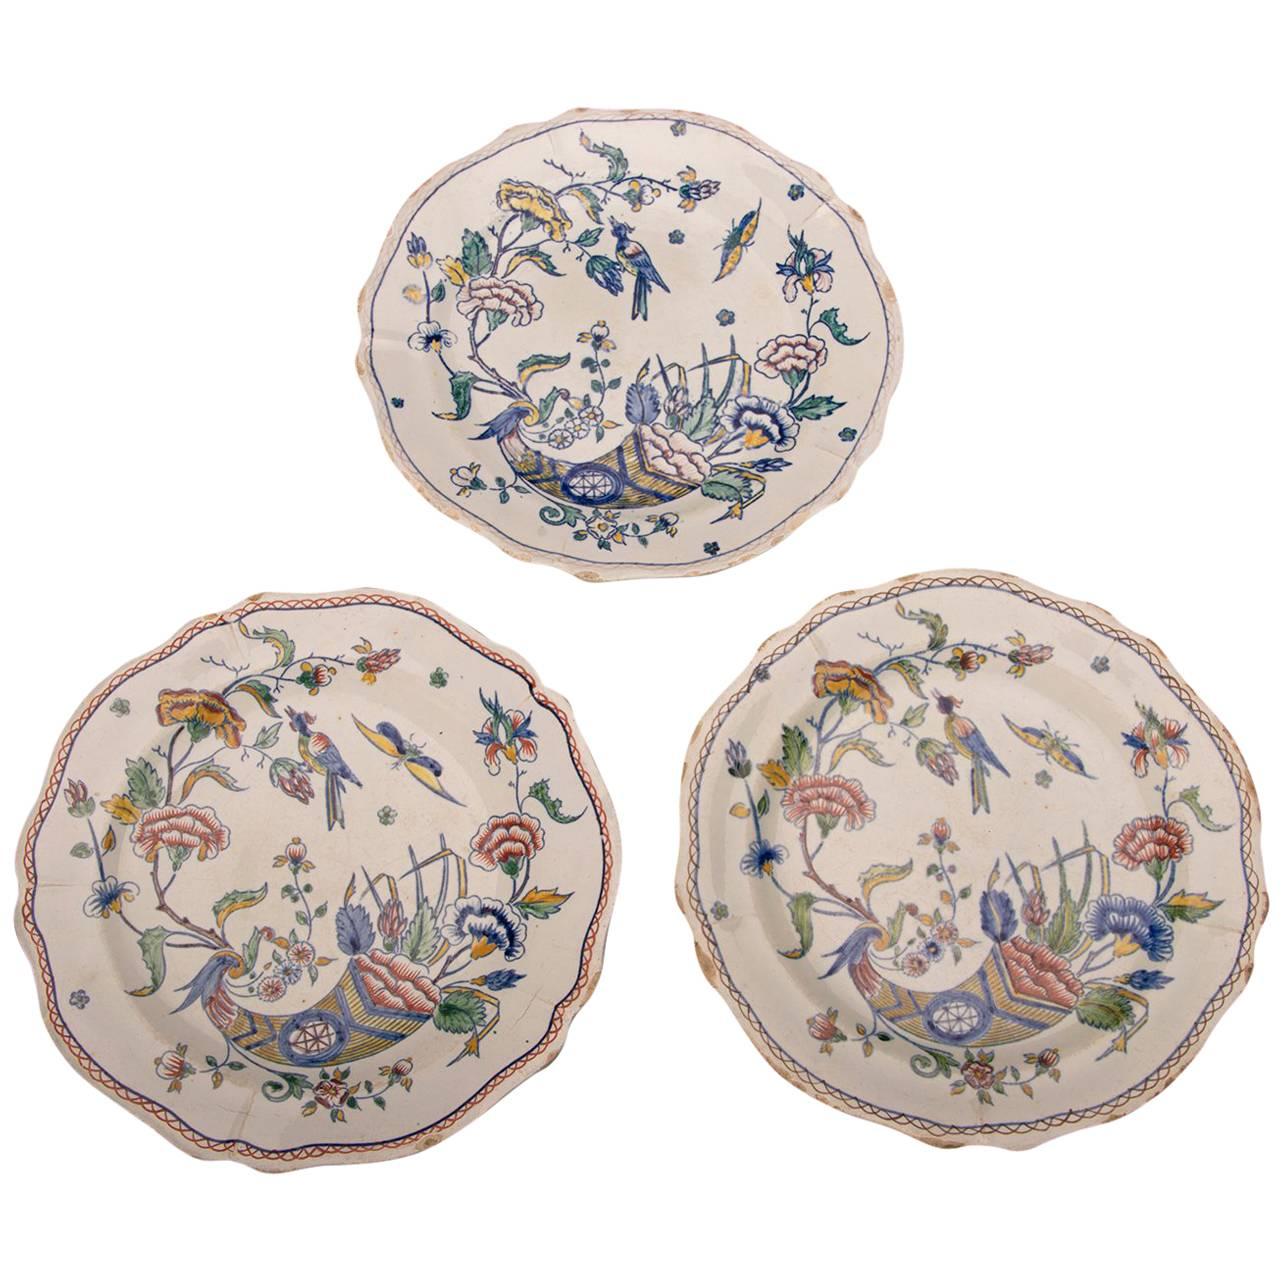 Three Antique French Gien Hand-Painted with Scallop Edge Plates, circa 1860 For Sale